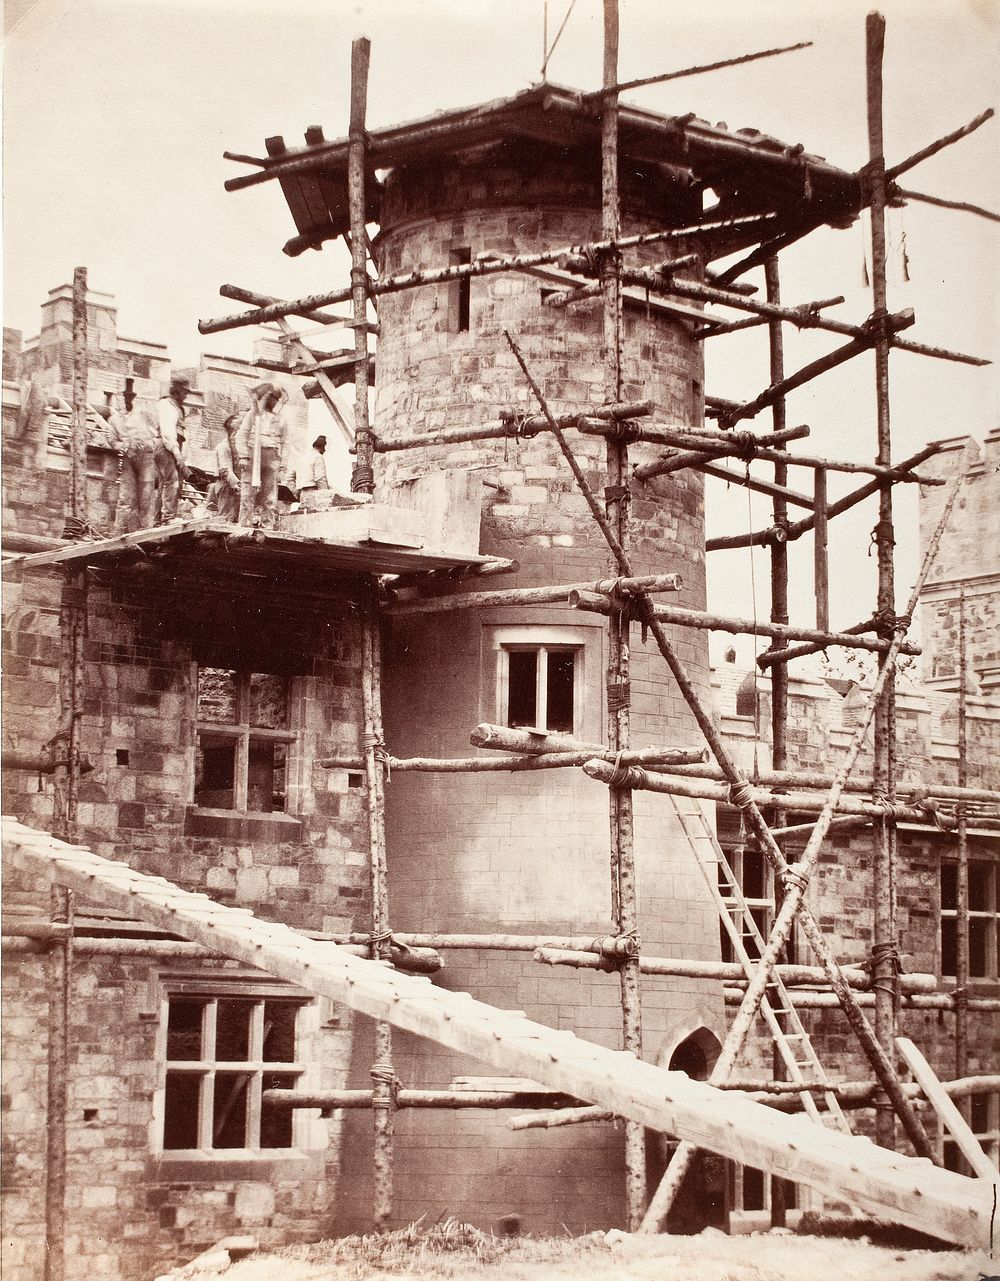 Scaffolding-Liviesmore Castle by F C Currey